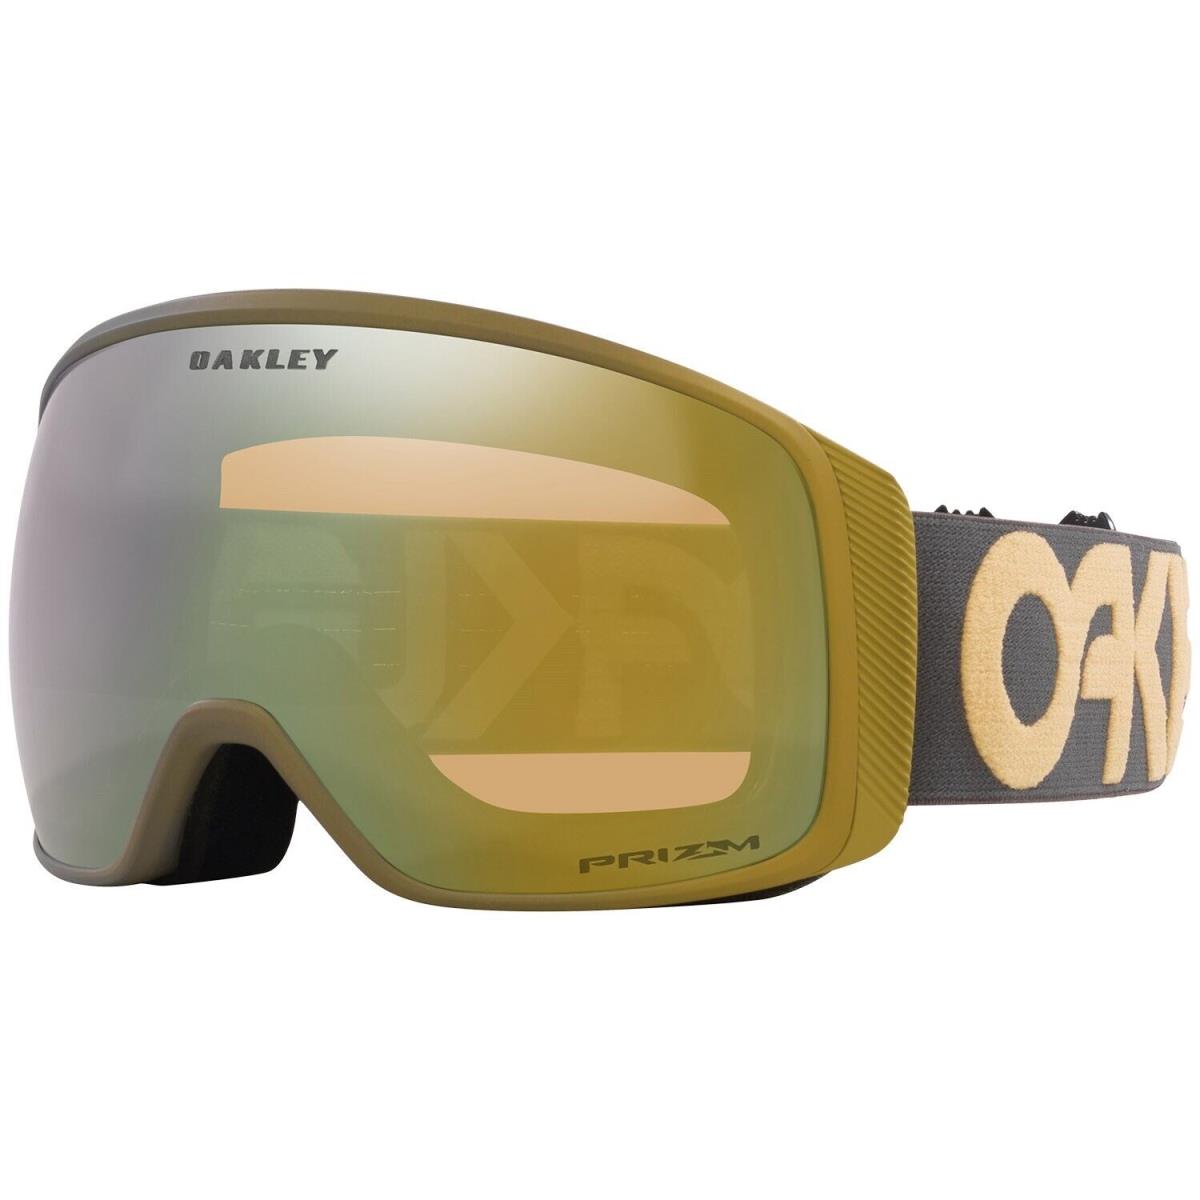 Oakley Flight Tracker L Snow Goggles Forged Iron/ Prizm Sage Gold Lens + Case